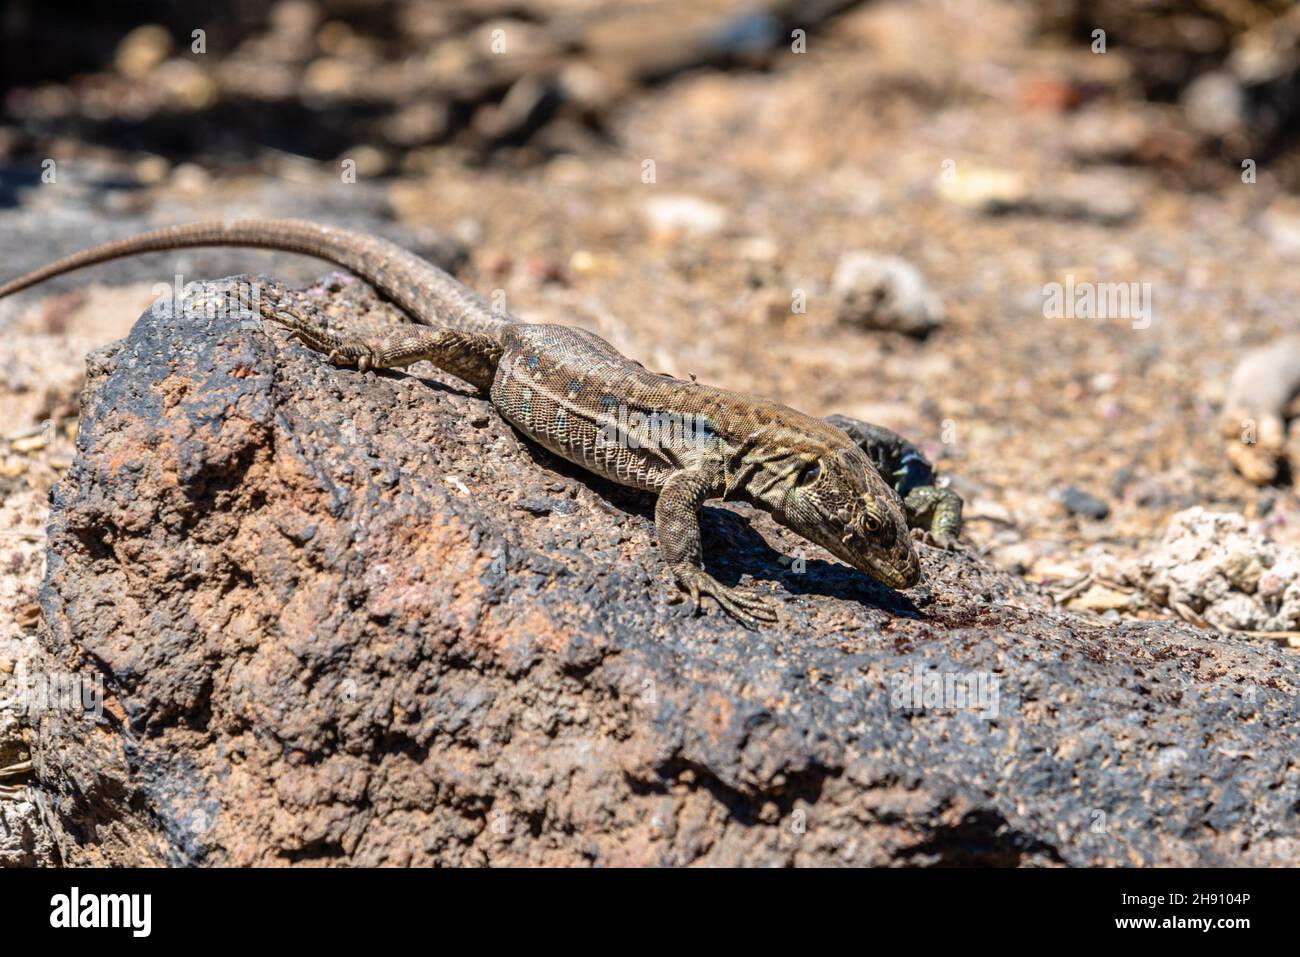 Adult male Tenerife lizard, Gallotia galloti, specie of lacertid or wall lizard endemic of Western Canary Islands. Stock Photo